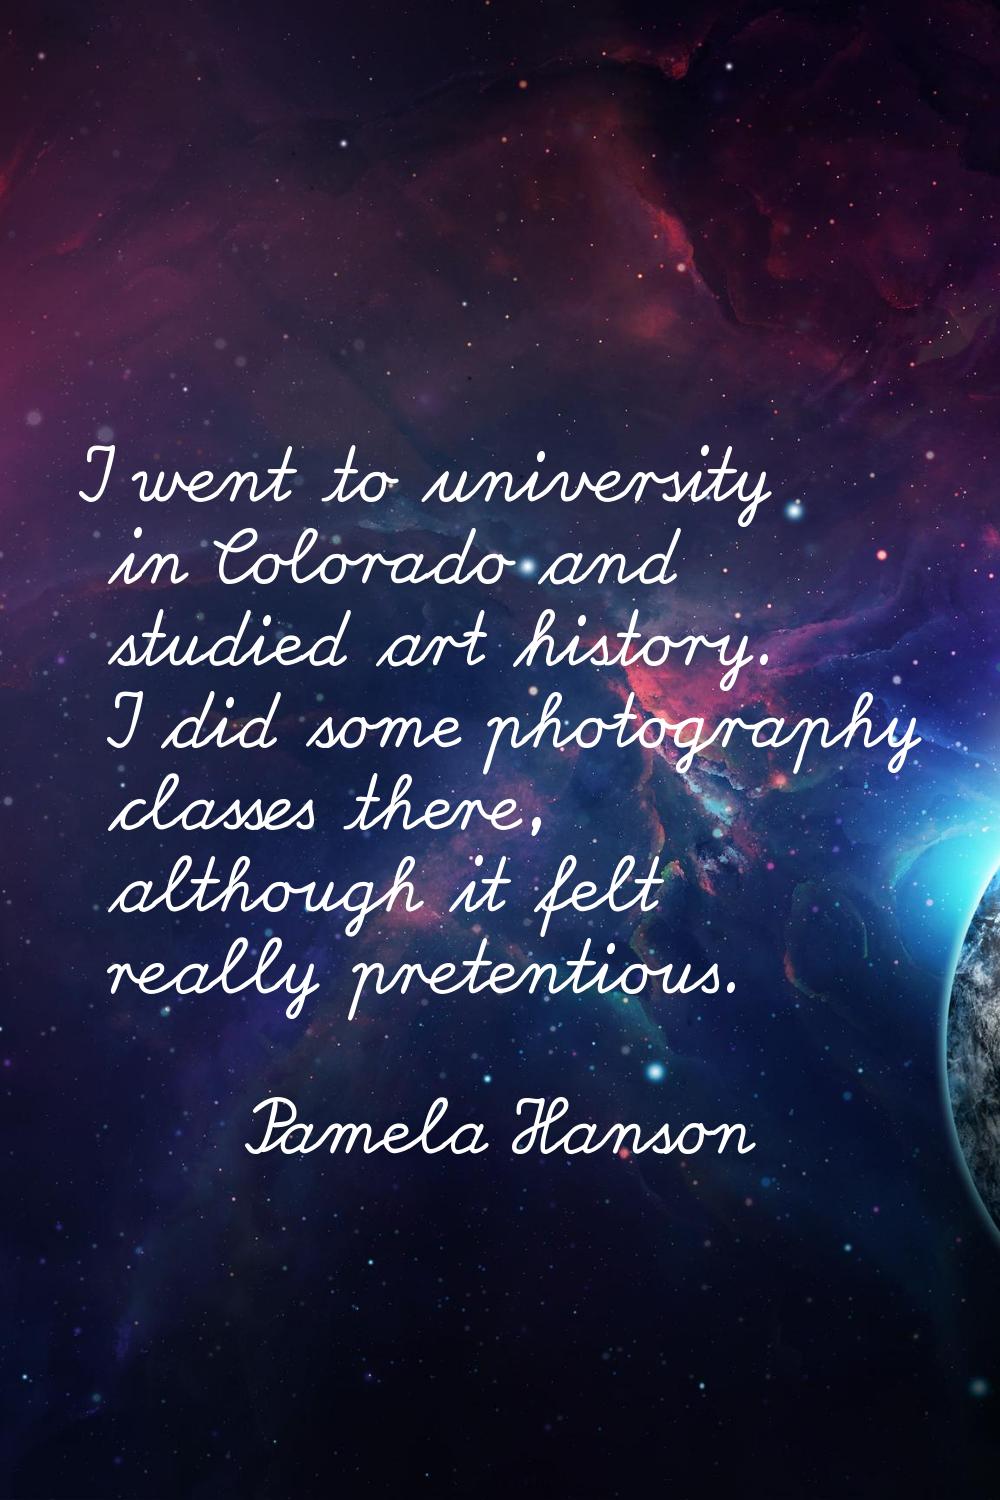 I went to university in Colorado and studied art history. I did some photography classes there, alt